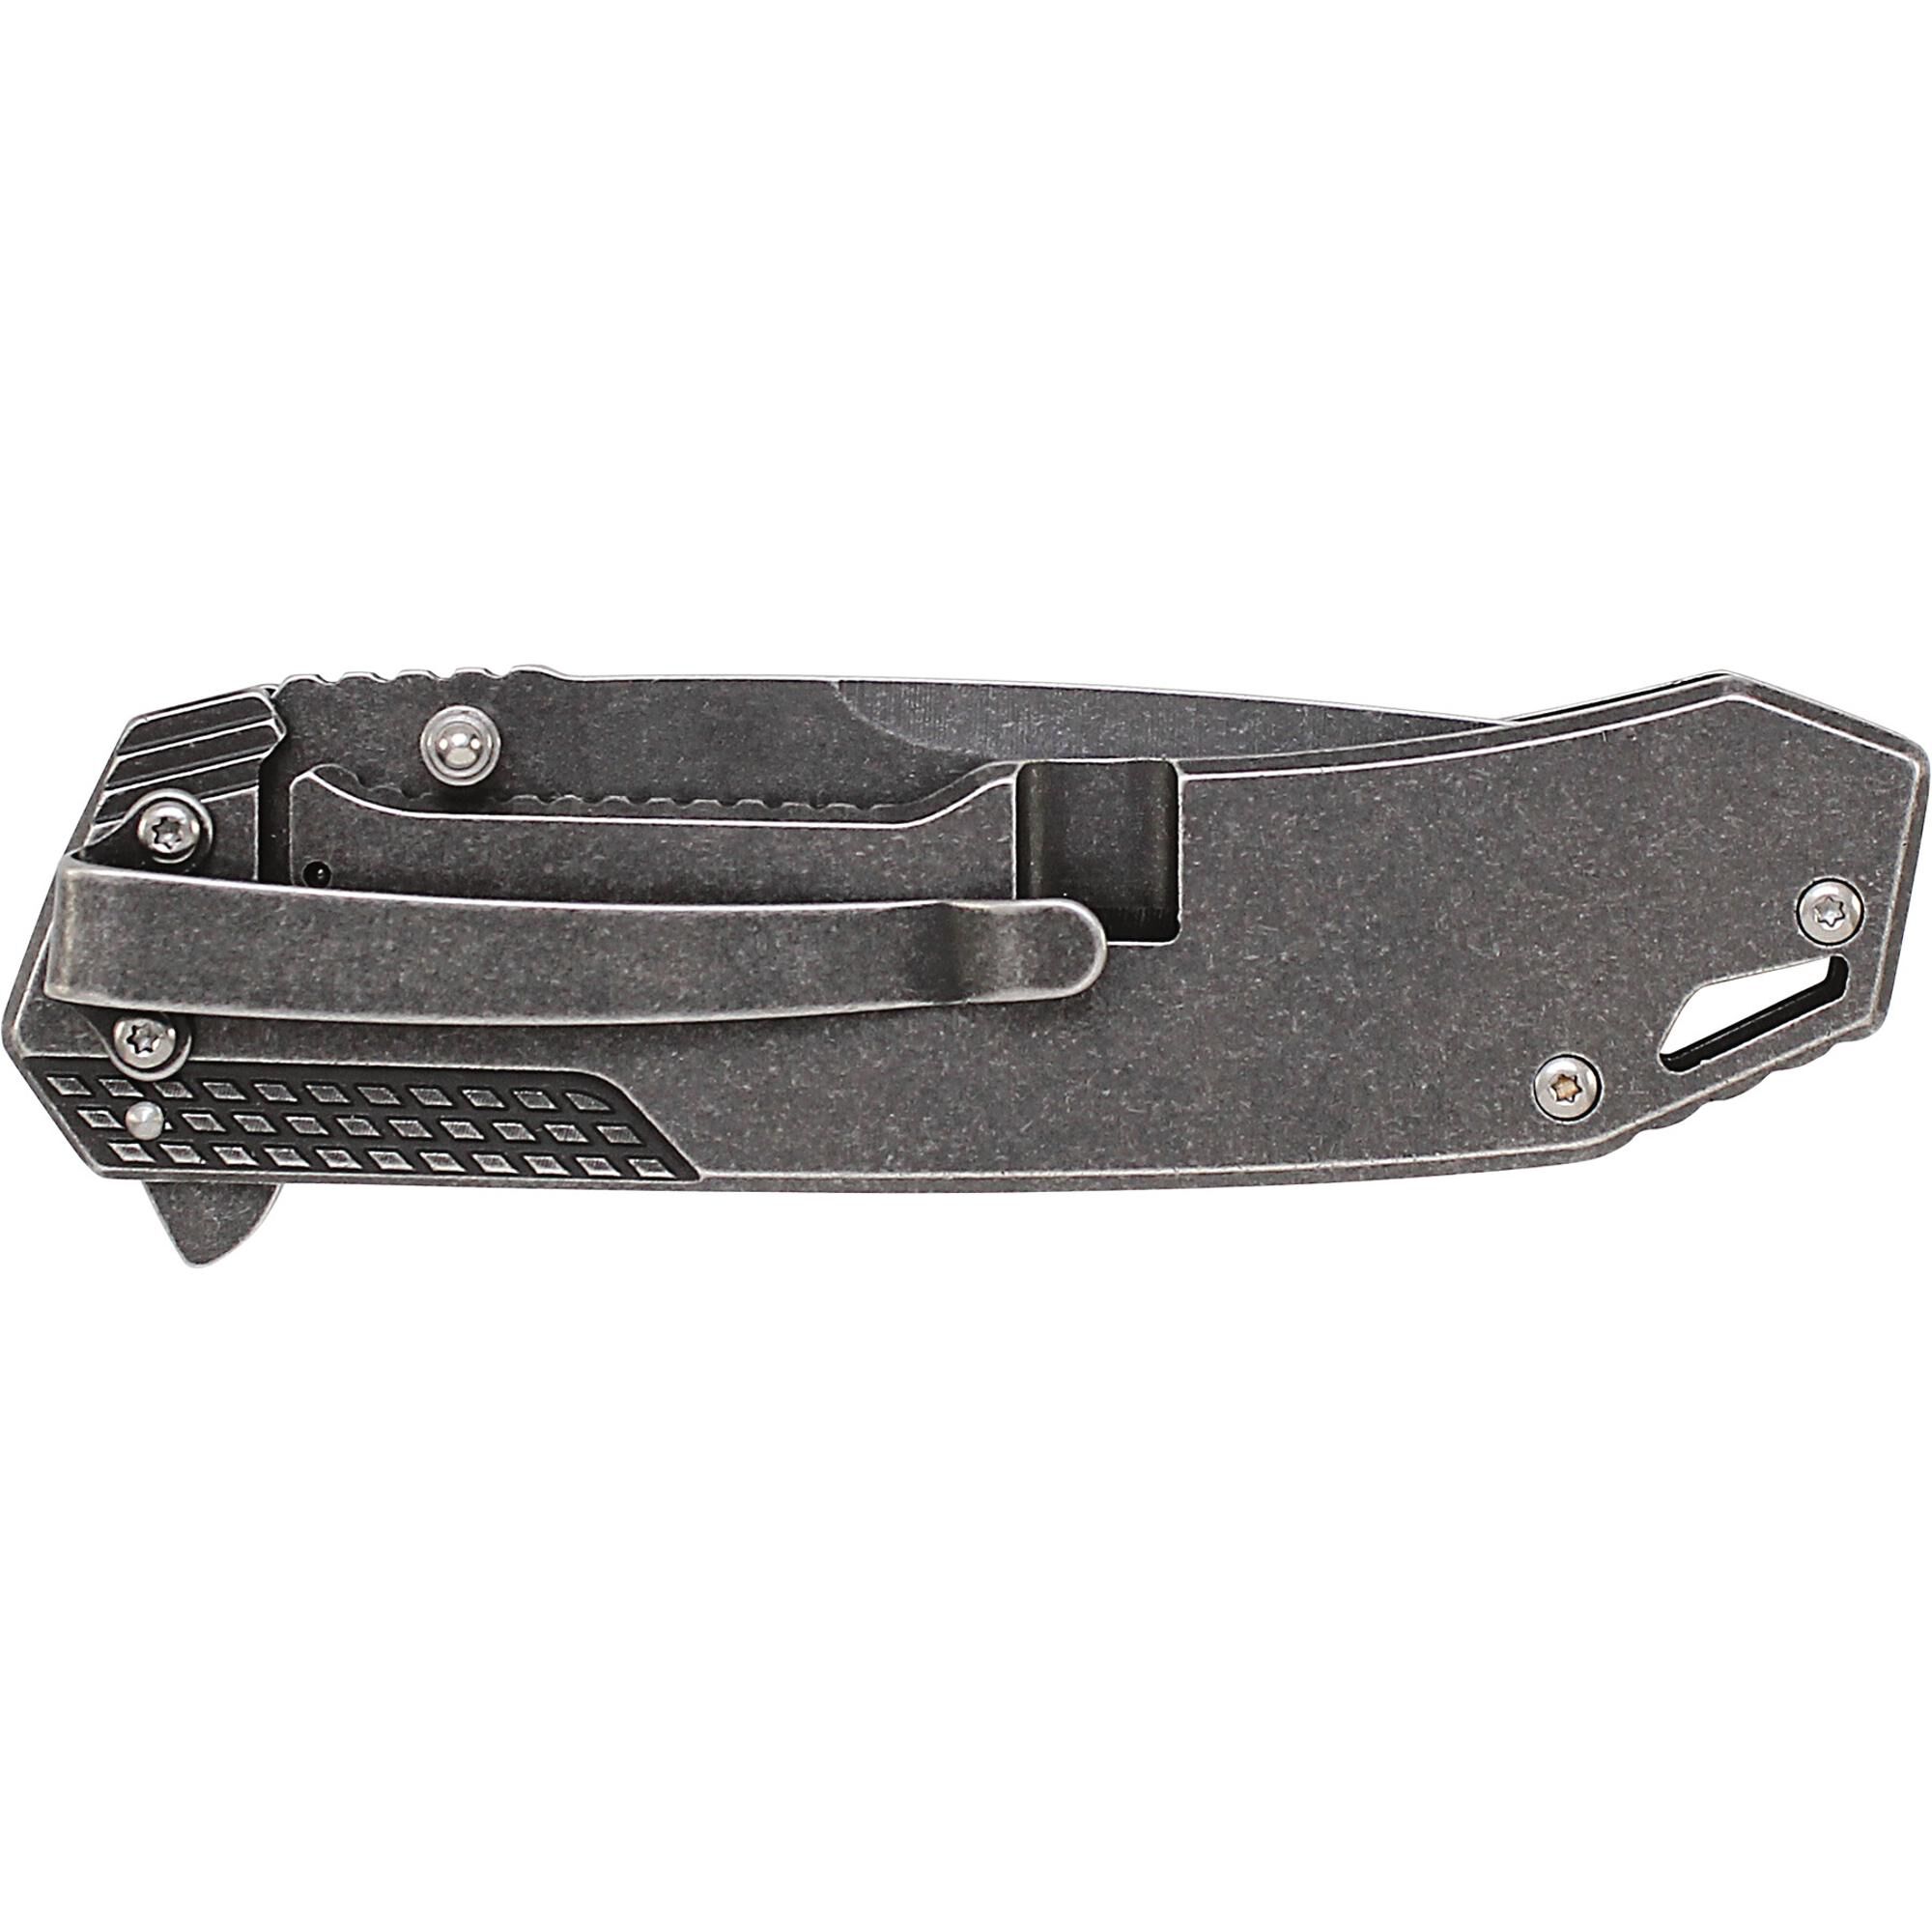 Smith & Wesson® SW609 Liner Lock Folding Knife | Smith & Wesson